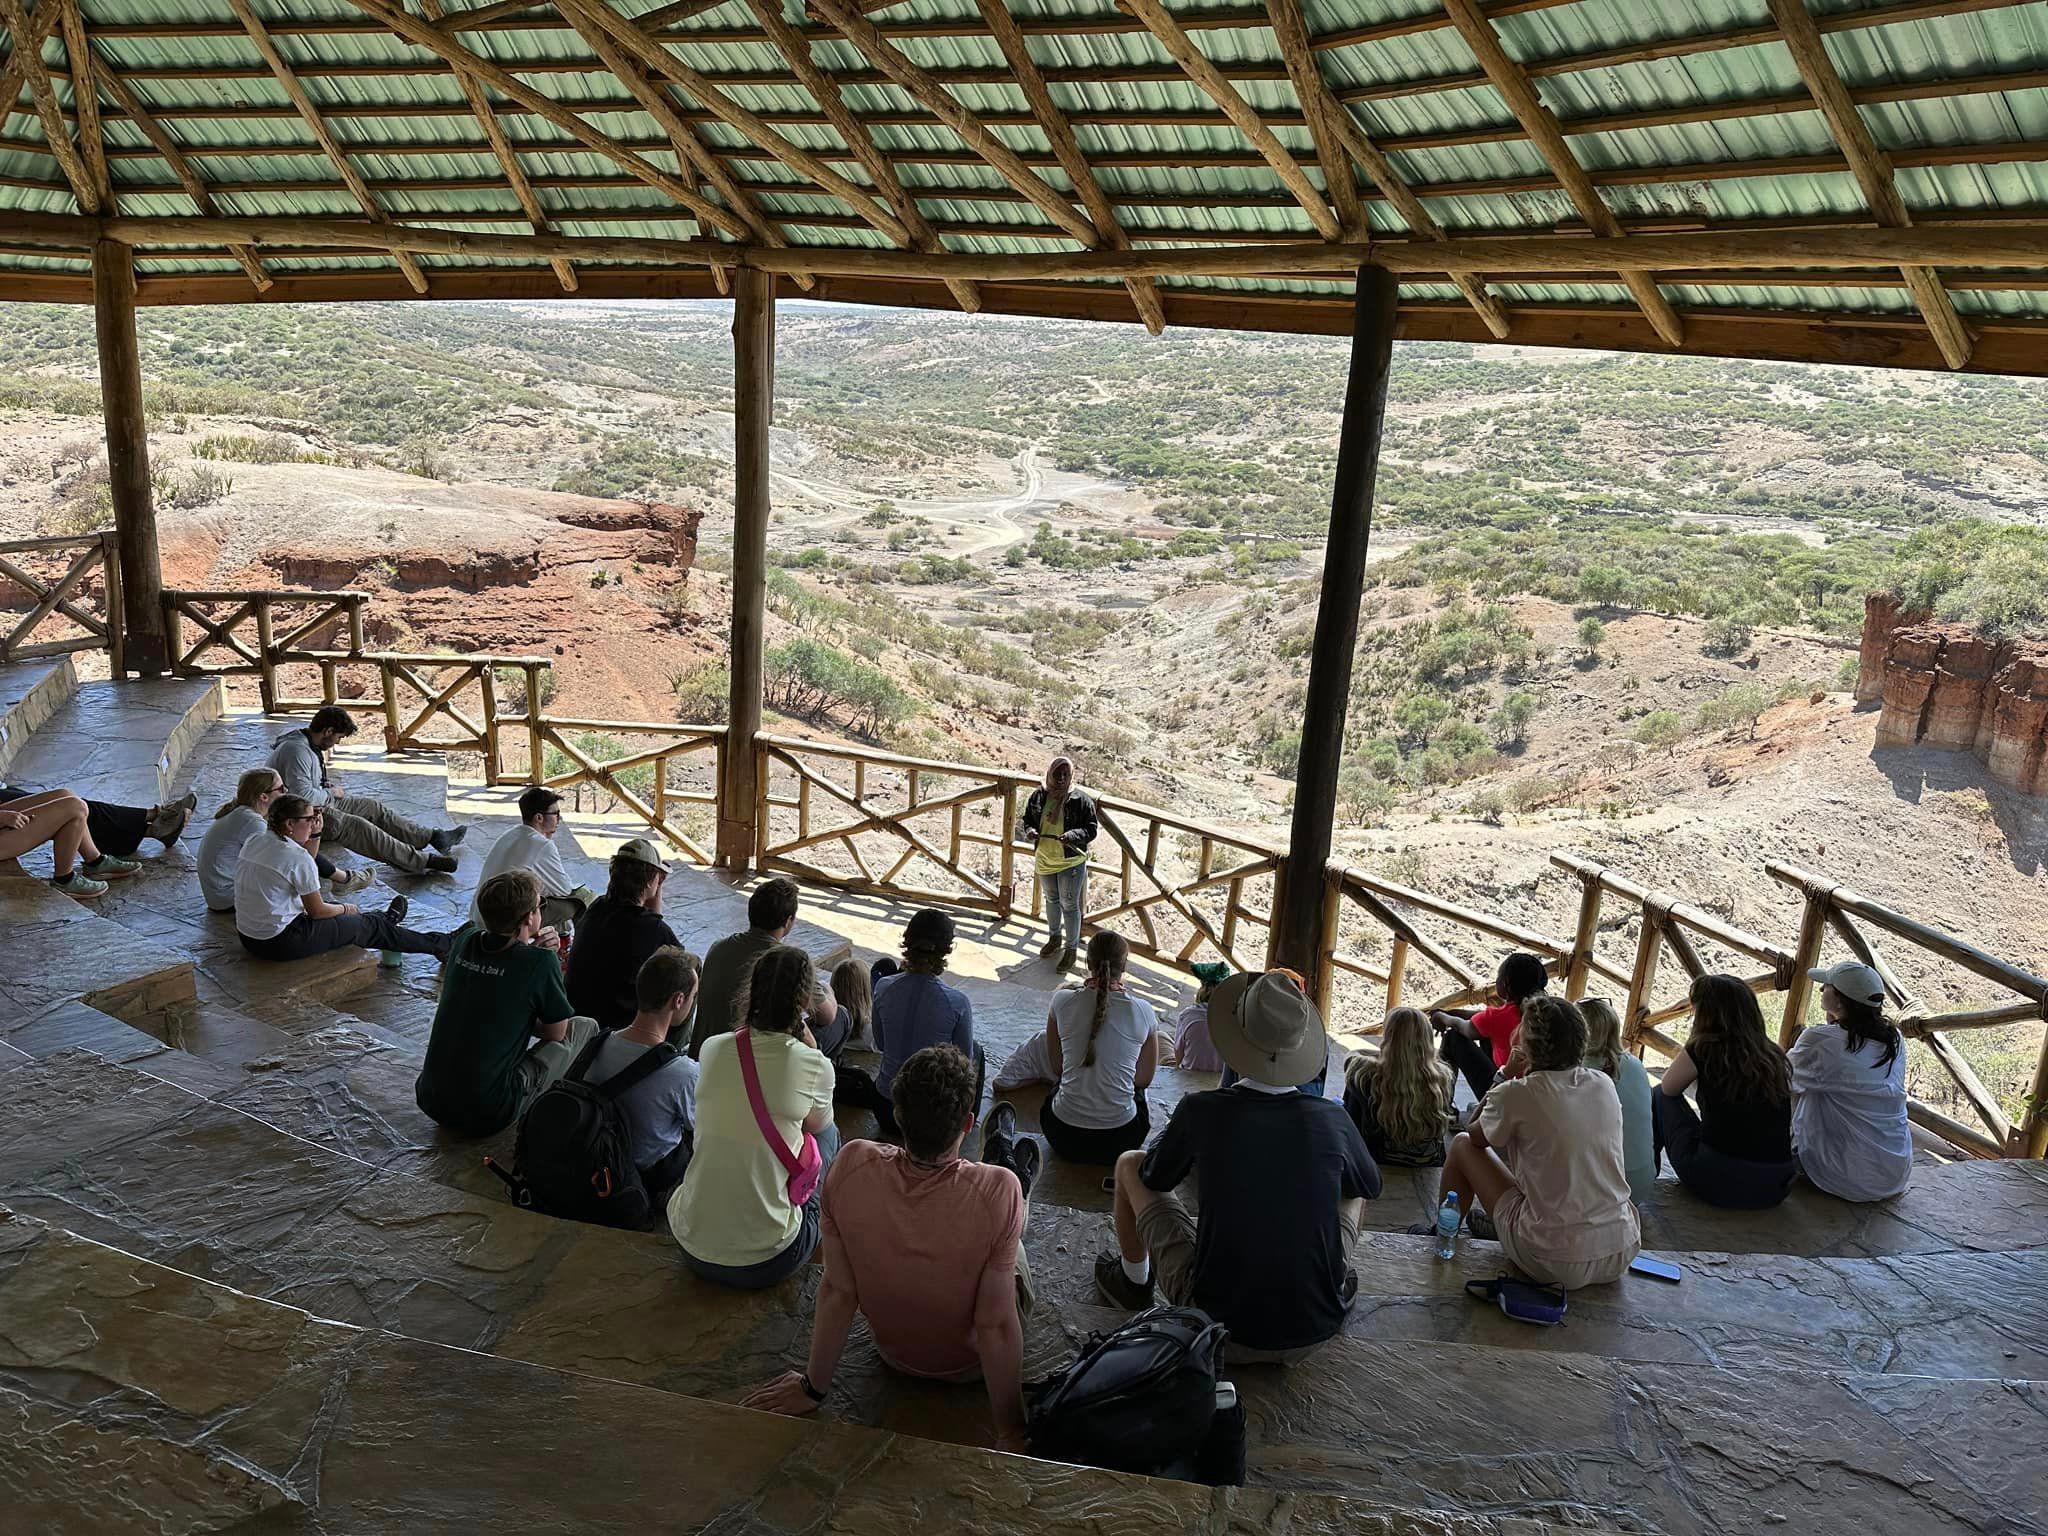 Students studying in an outdoor classroom in Tanzania